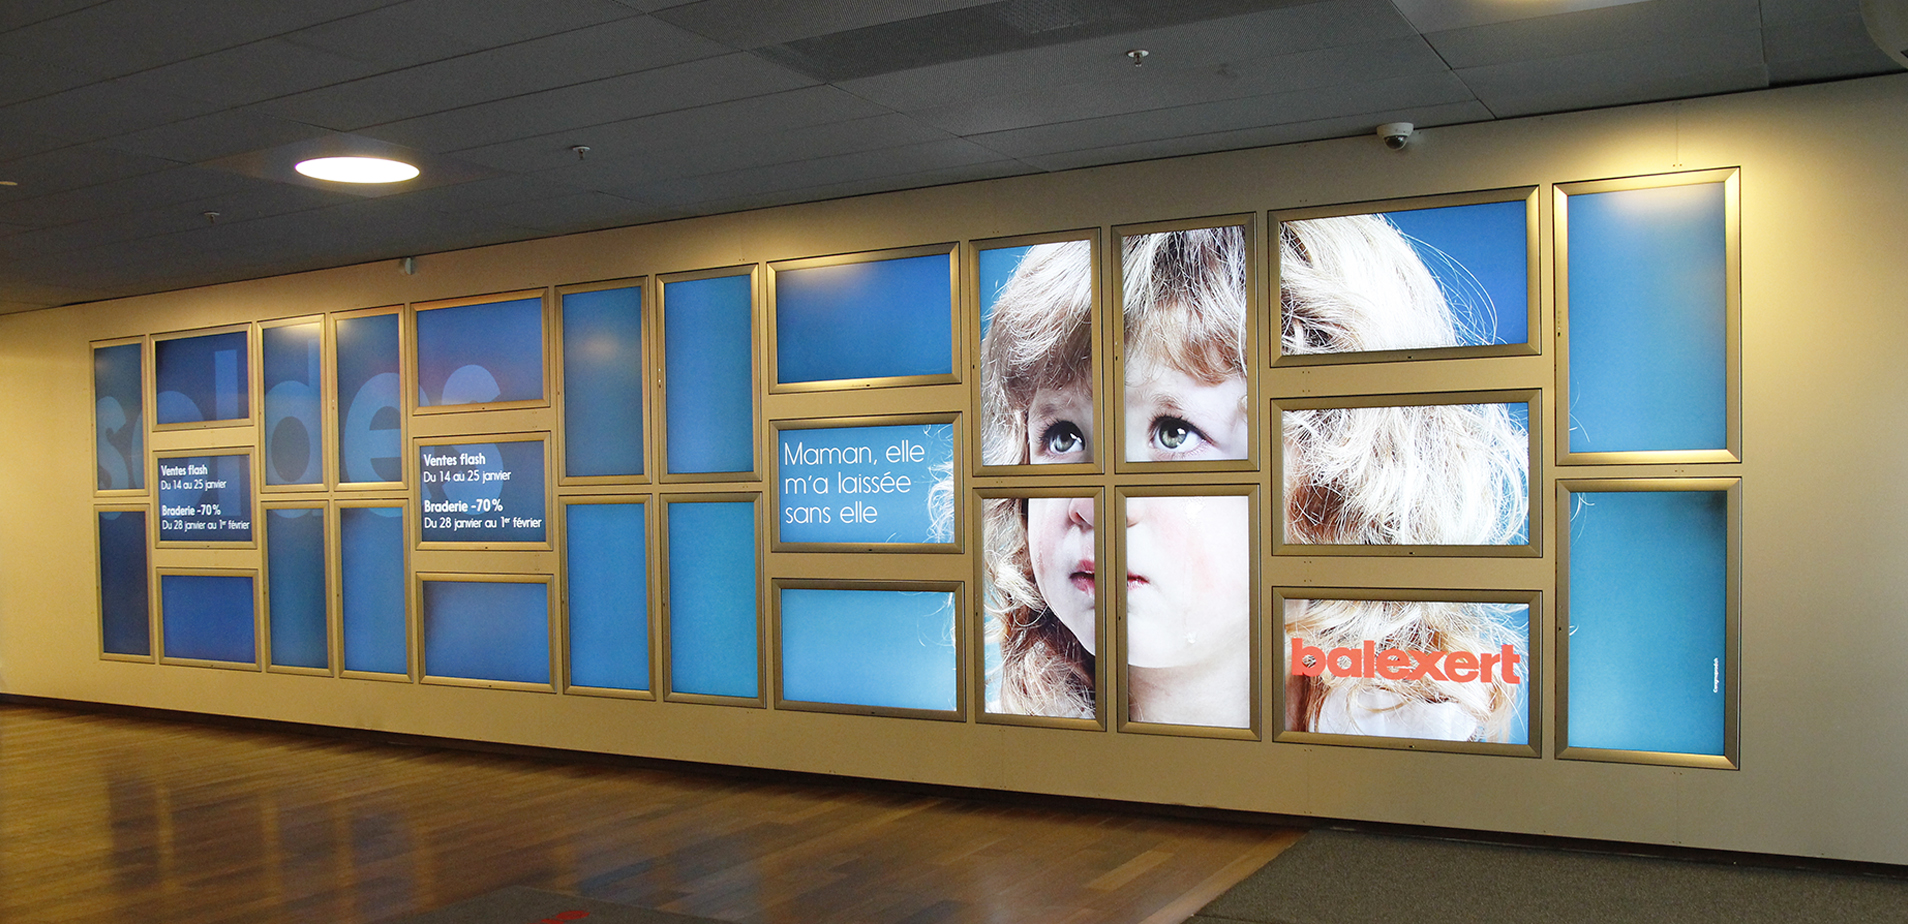 Display on several screens of a poster from print advertising campaign